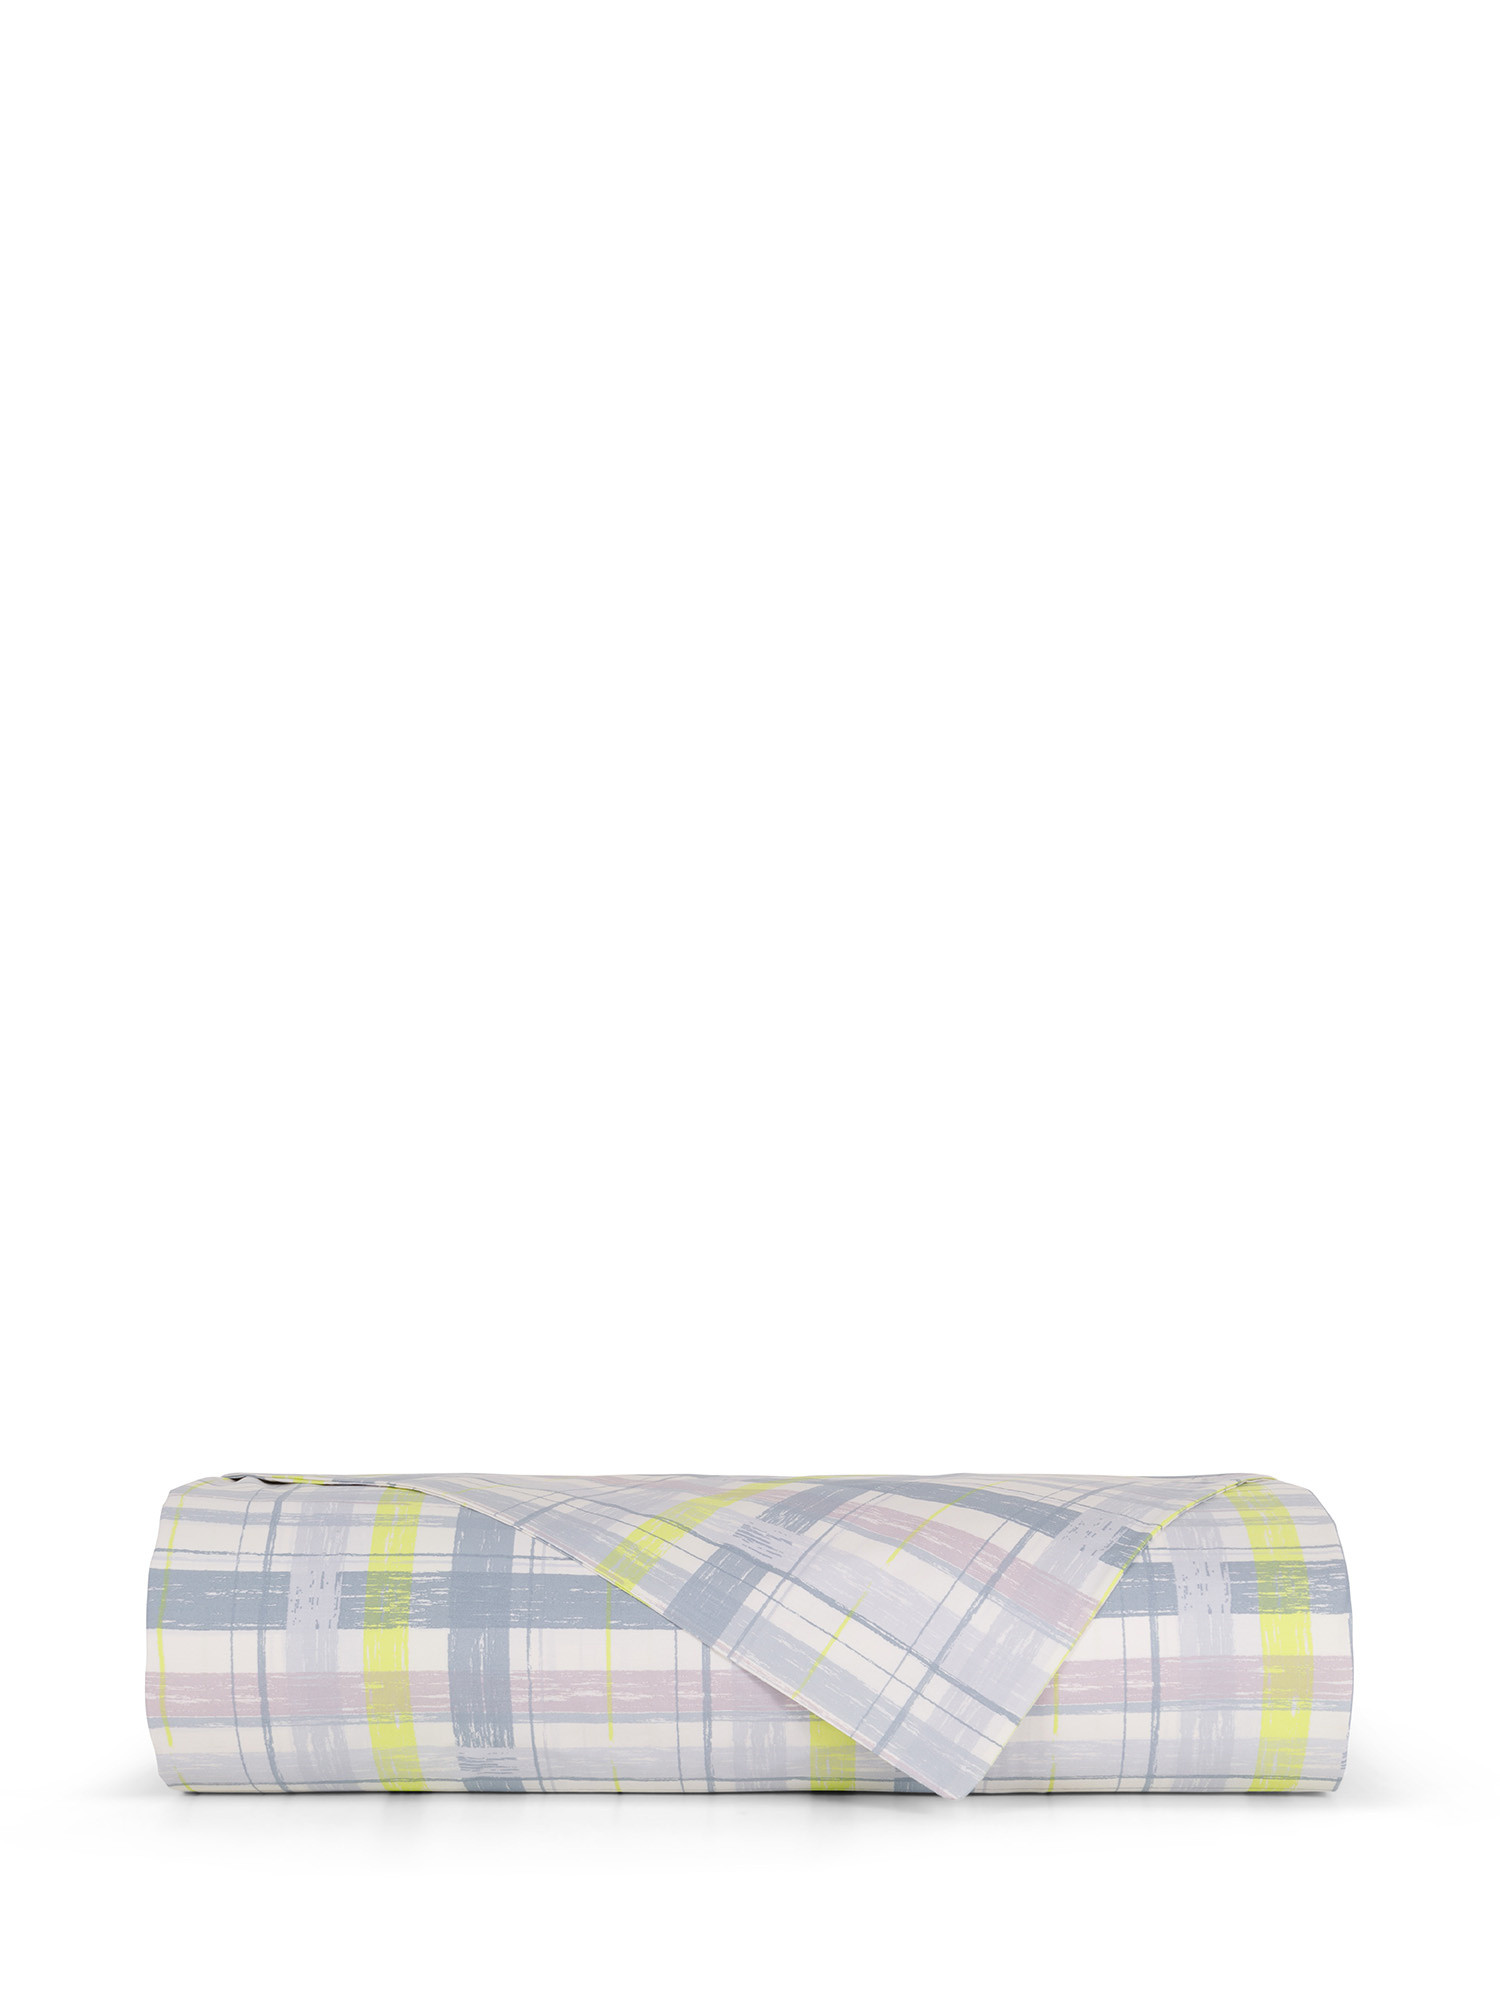 Cotton percale duvet cover with check print, Multicolor, large image number 1